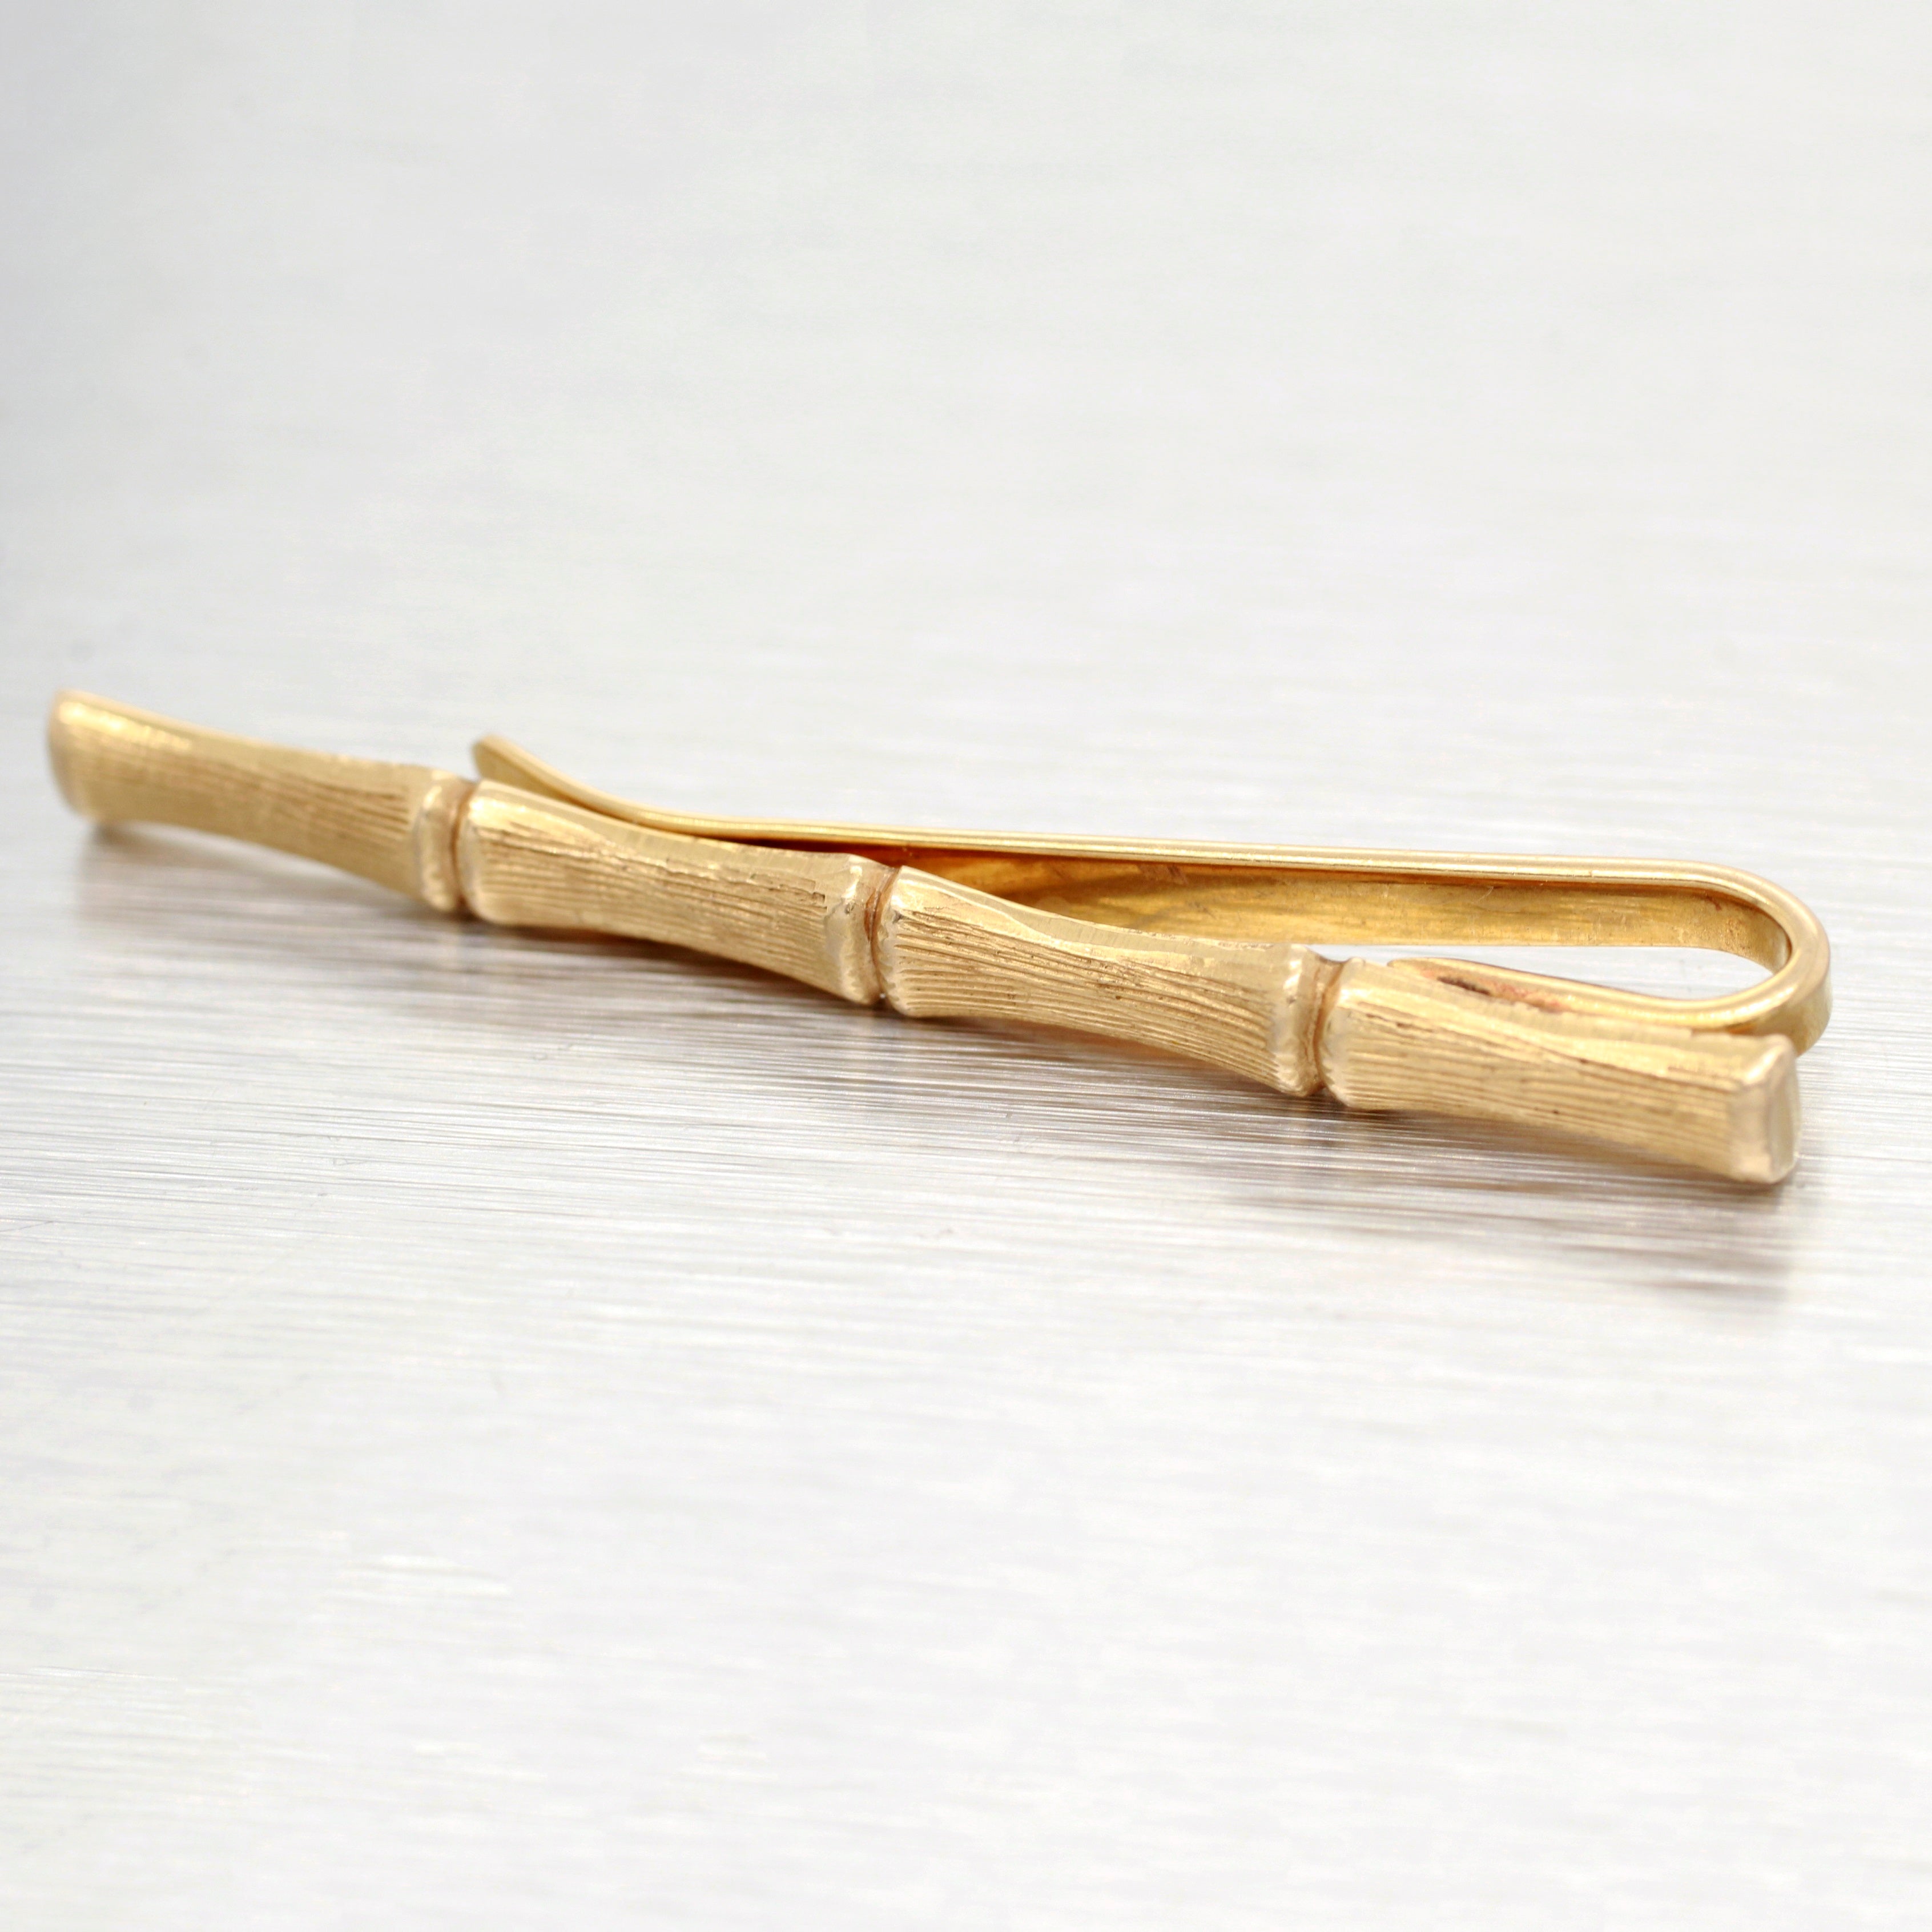 Vintage Solid 14k Yellow Gold Bamboo Style Men's Tie Clip | 1 5/8"